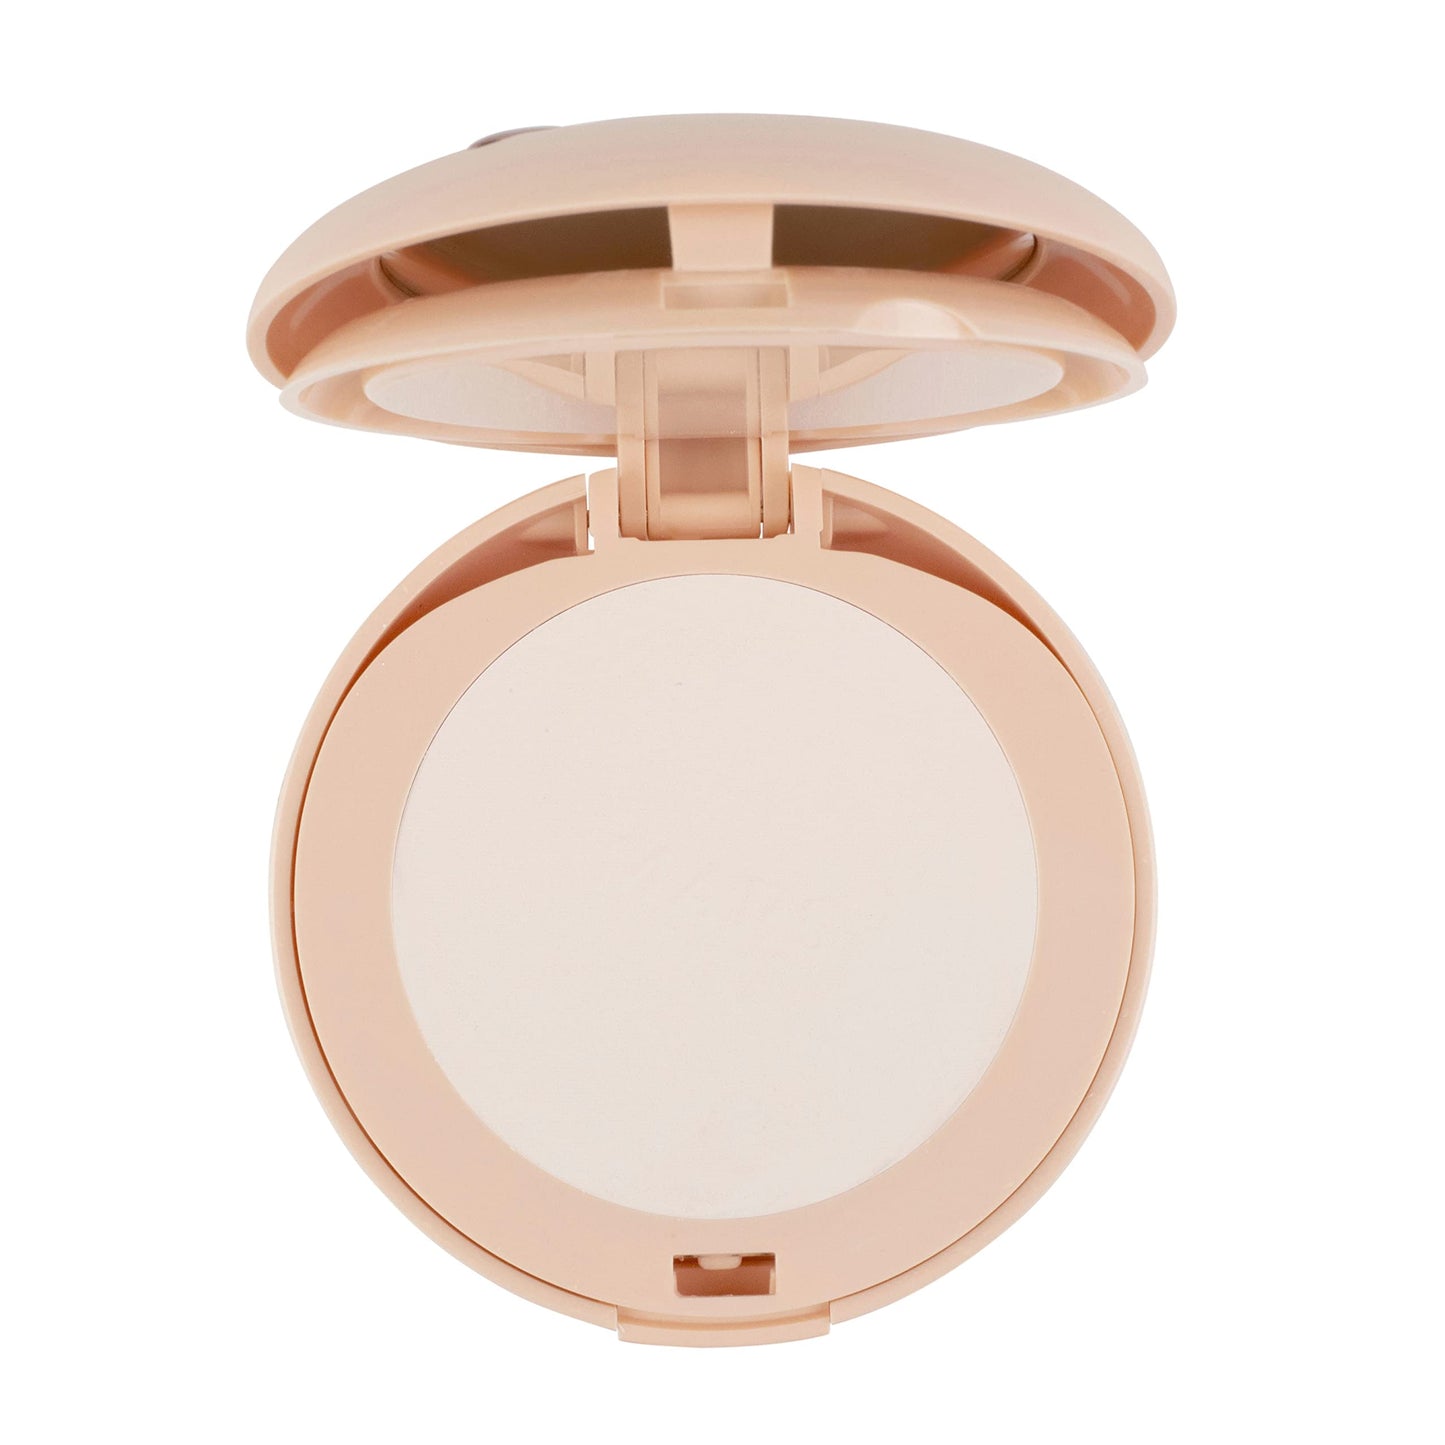 Mars 3D Sweet Oil-Control Double Compact Powder, 20g (P412-01)